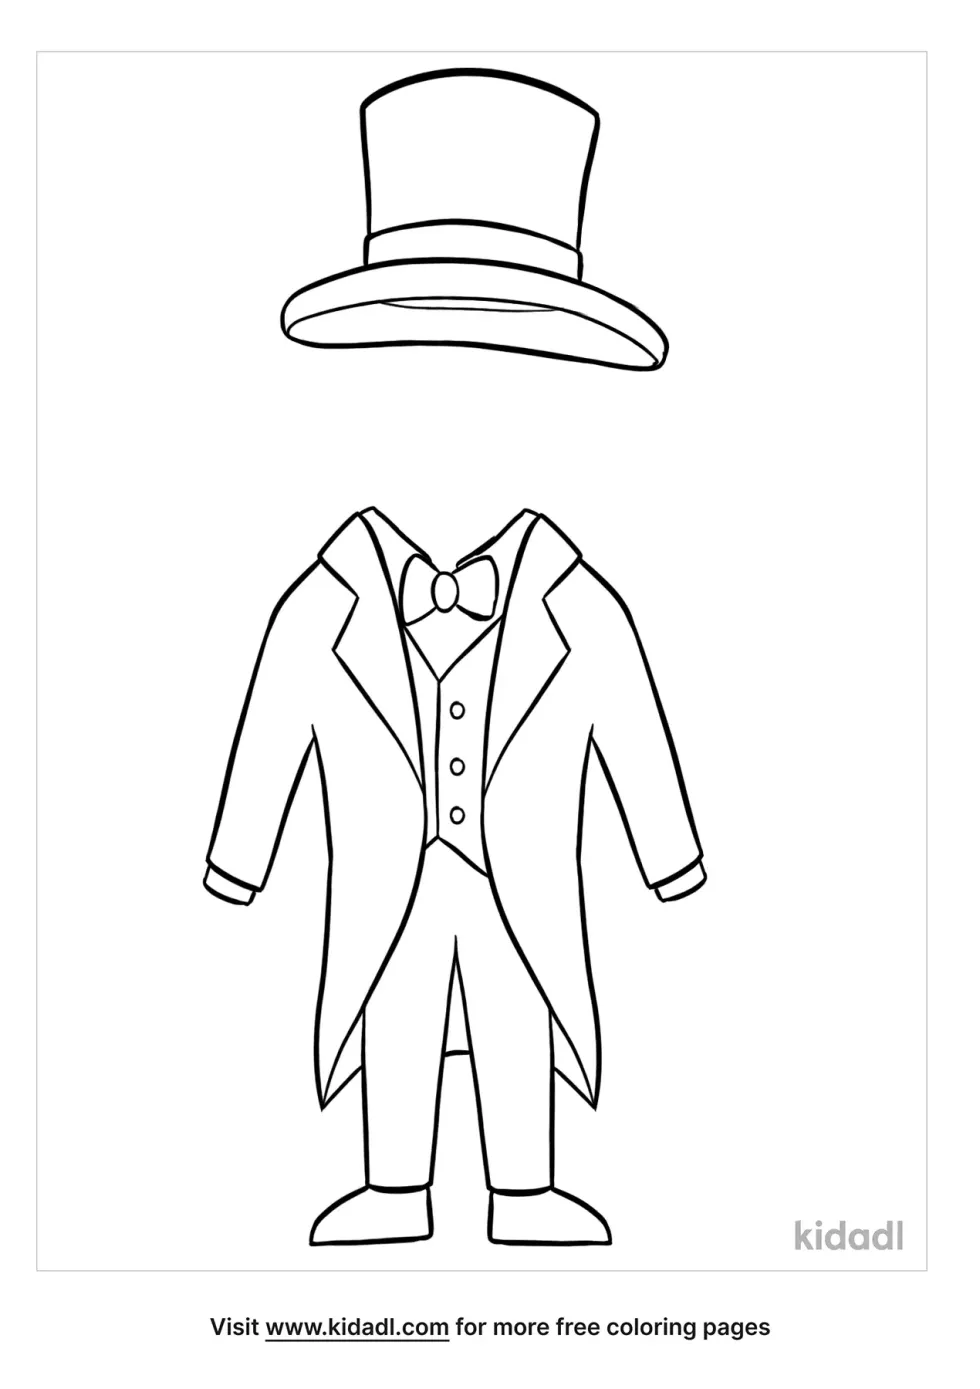 Abraham Lincoln Suit Coloring Page